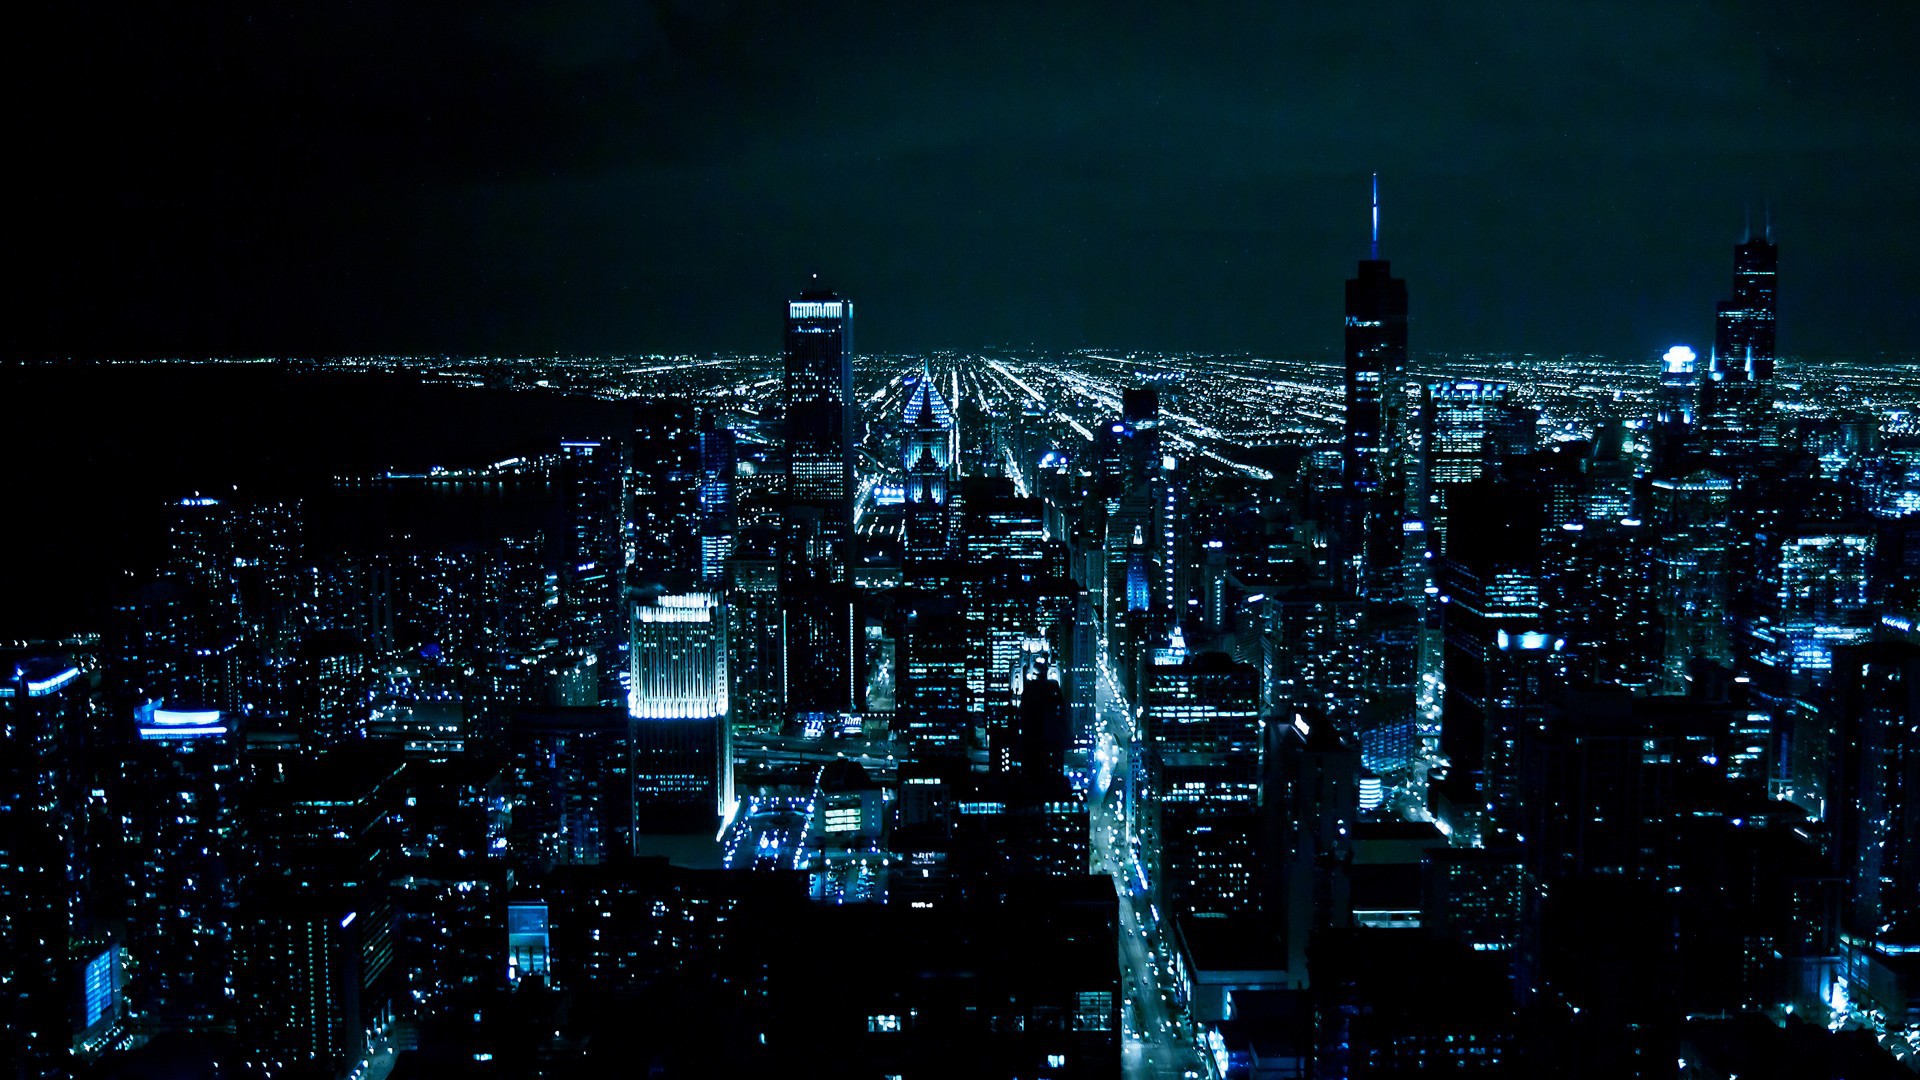 Night Night city Chicago Skyscraper wallpapers and images